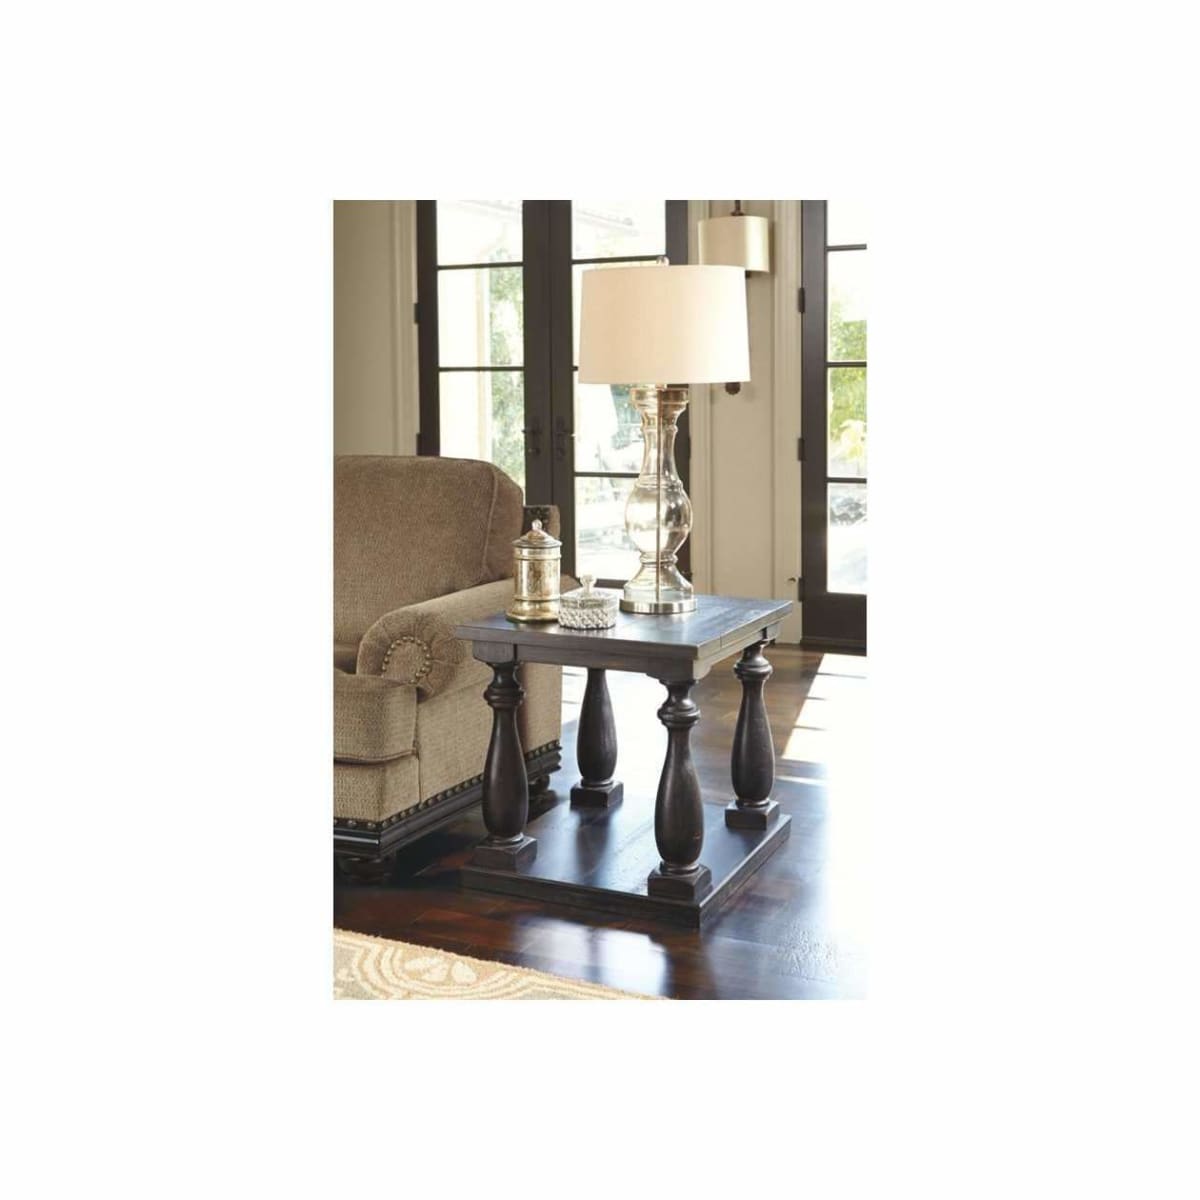 Mallacar End Table - END TABLE/SIDE TABLE